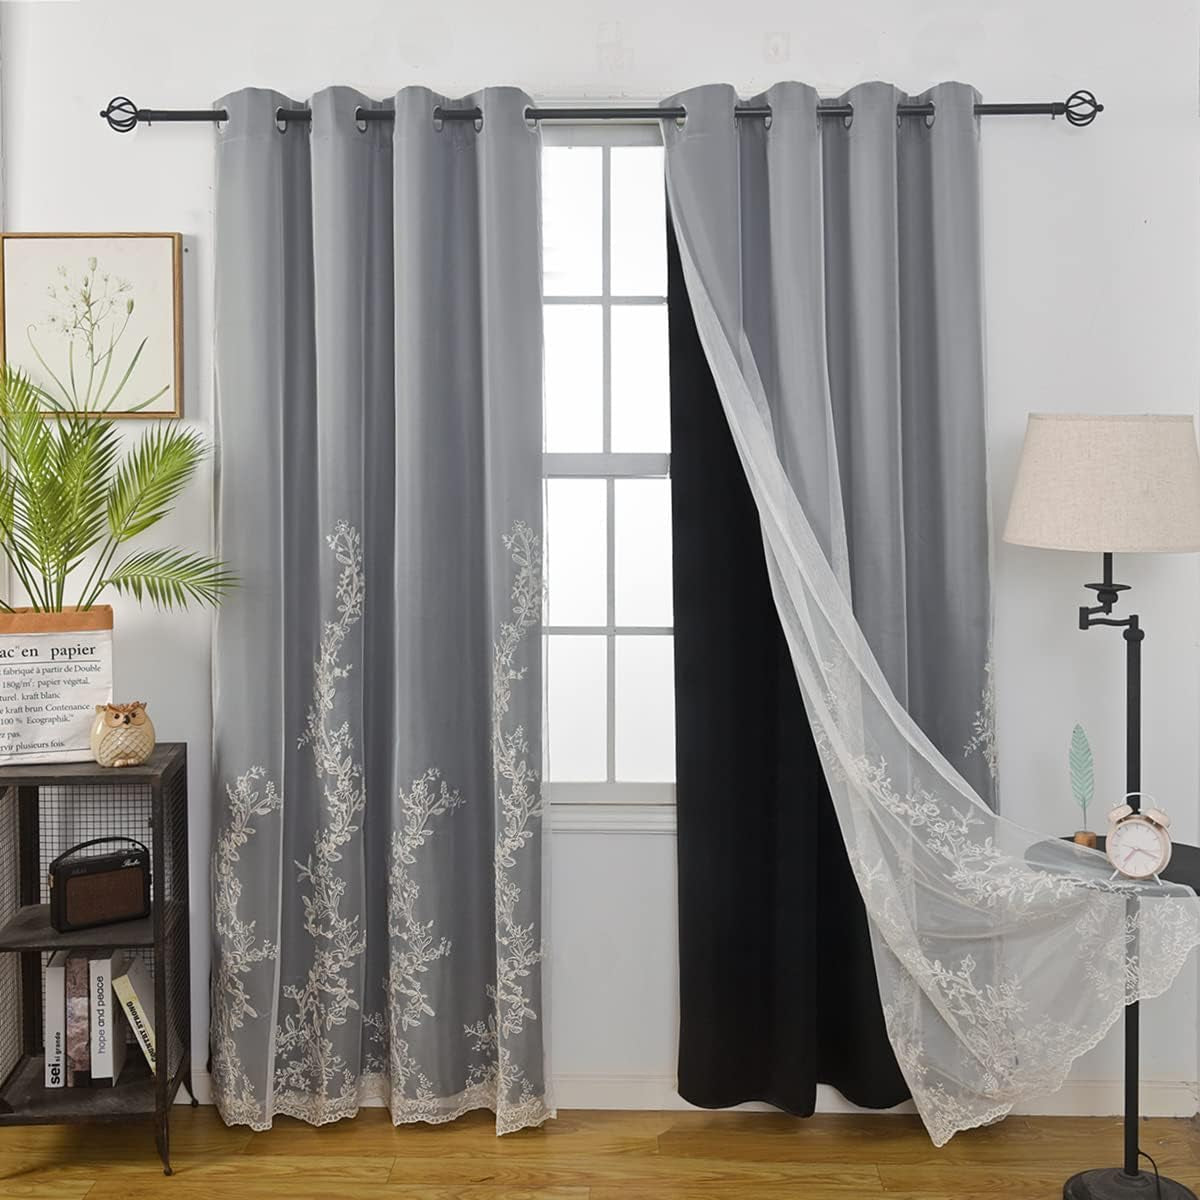 GYROHOME Double Layered Curtains with Embroidered White Sheer Tulle, Mix and Match Curtains Room Darkening Grommet Top Thermal Insulated Drapes,2Panels,52X84Inch,Beige  GYROHOME Black 52Wx63Lx2 